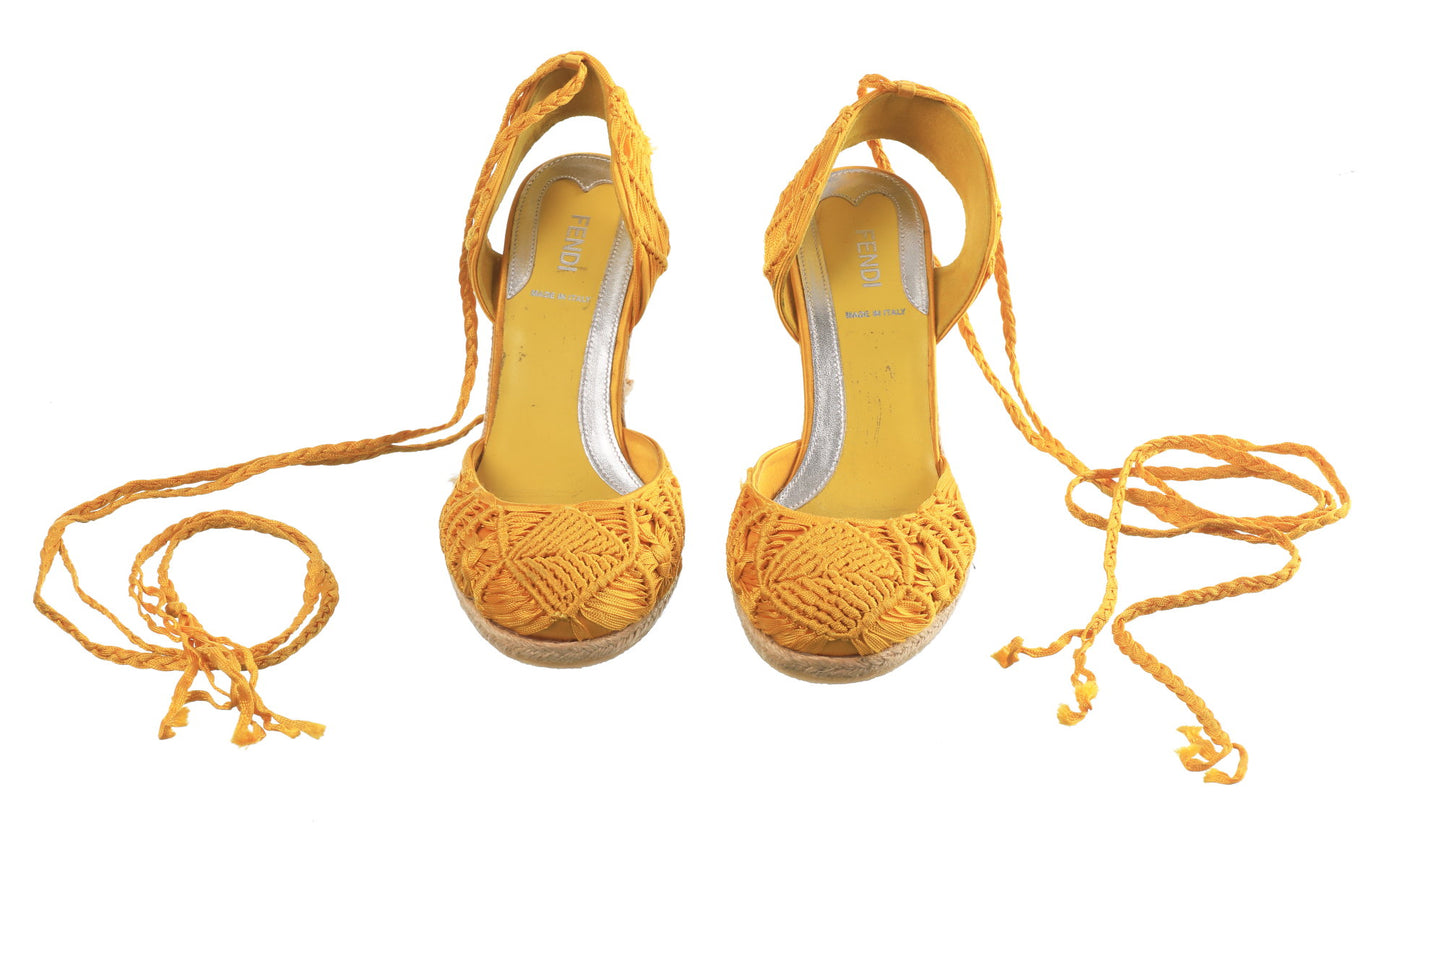 Fendi espadrilles with rope sole and heel